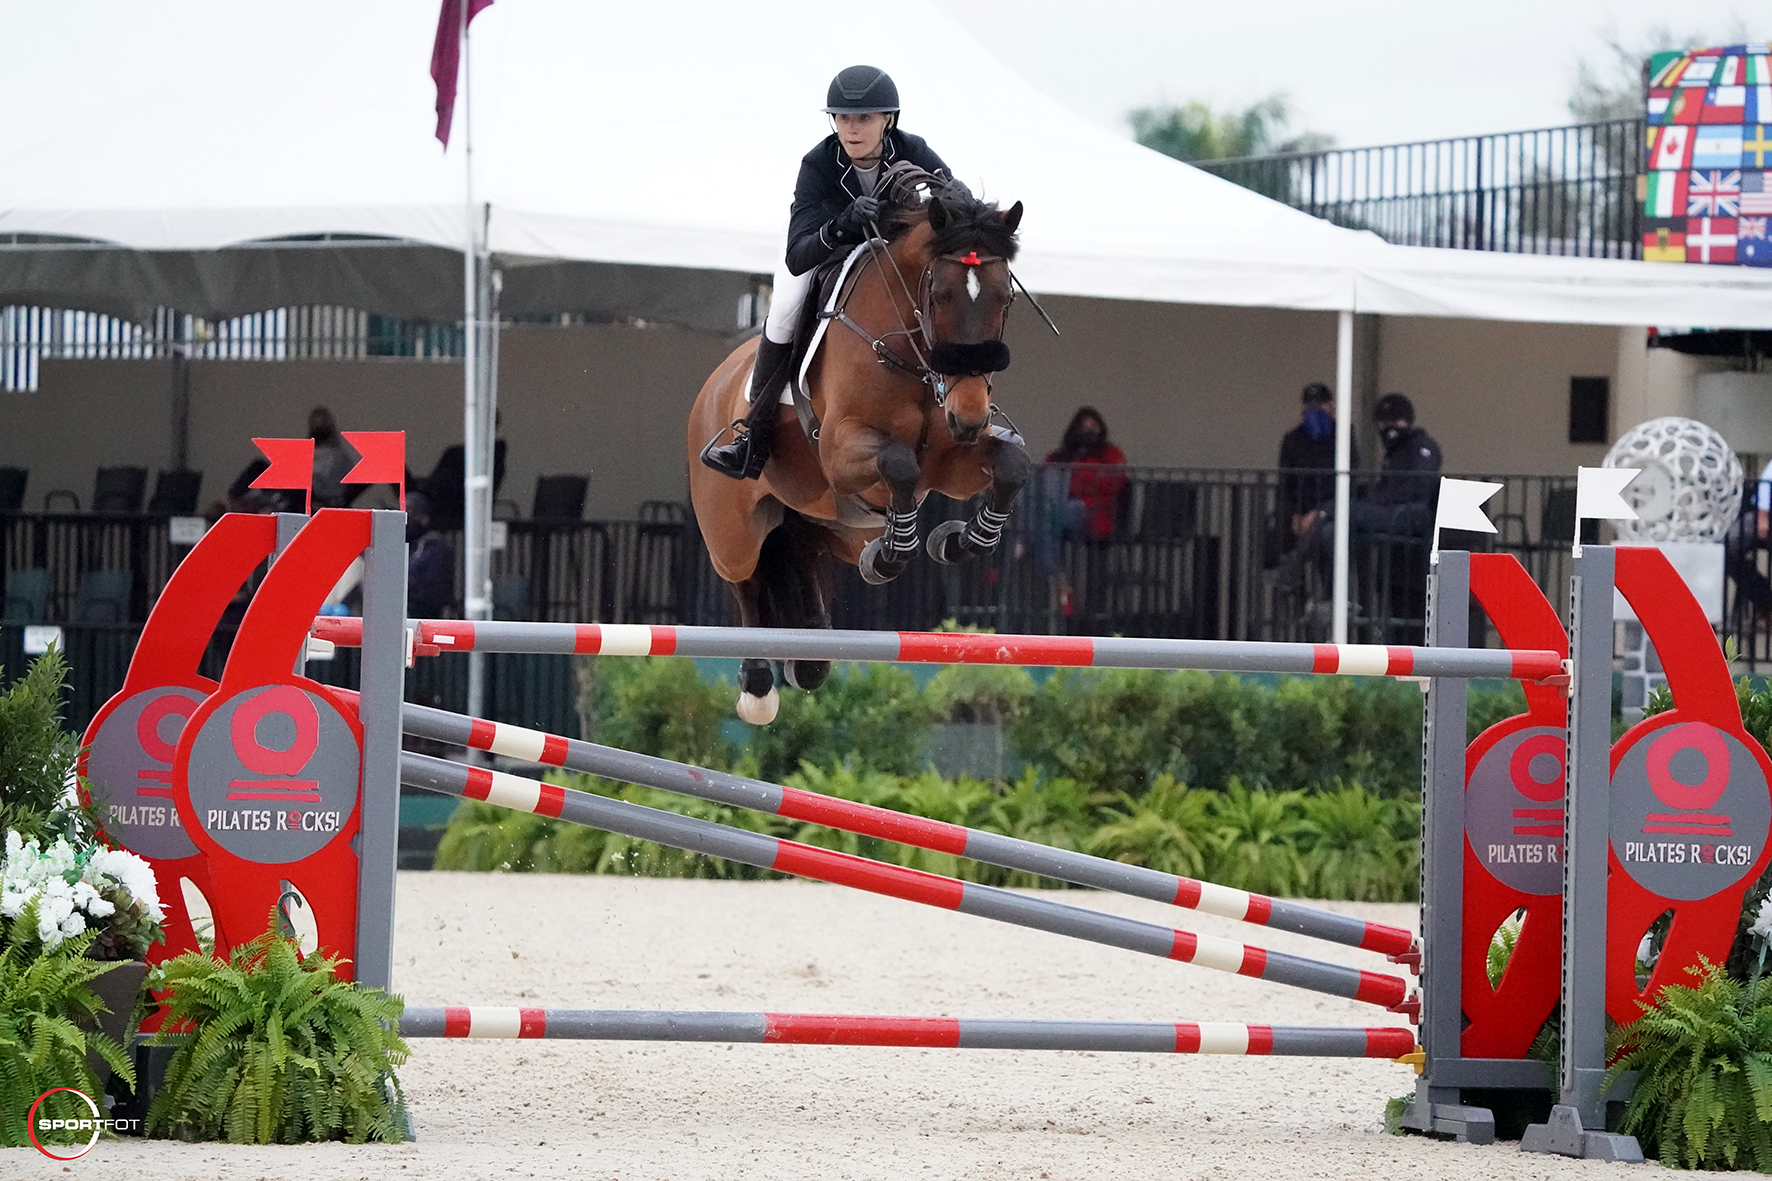 Hilary McNerney and Singuletto Take Top Honors in the Wellington Grand Prix